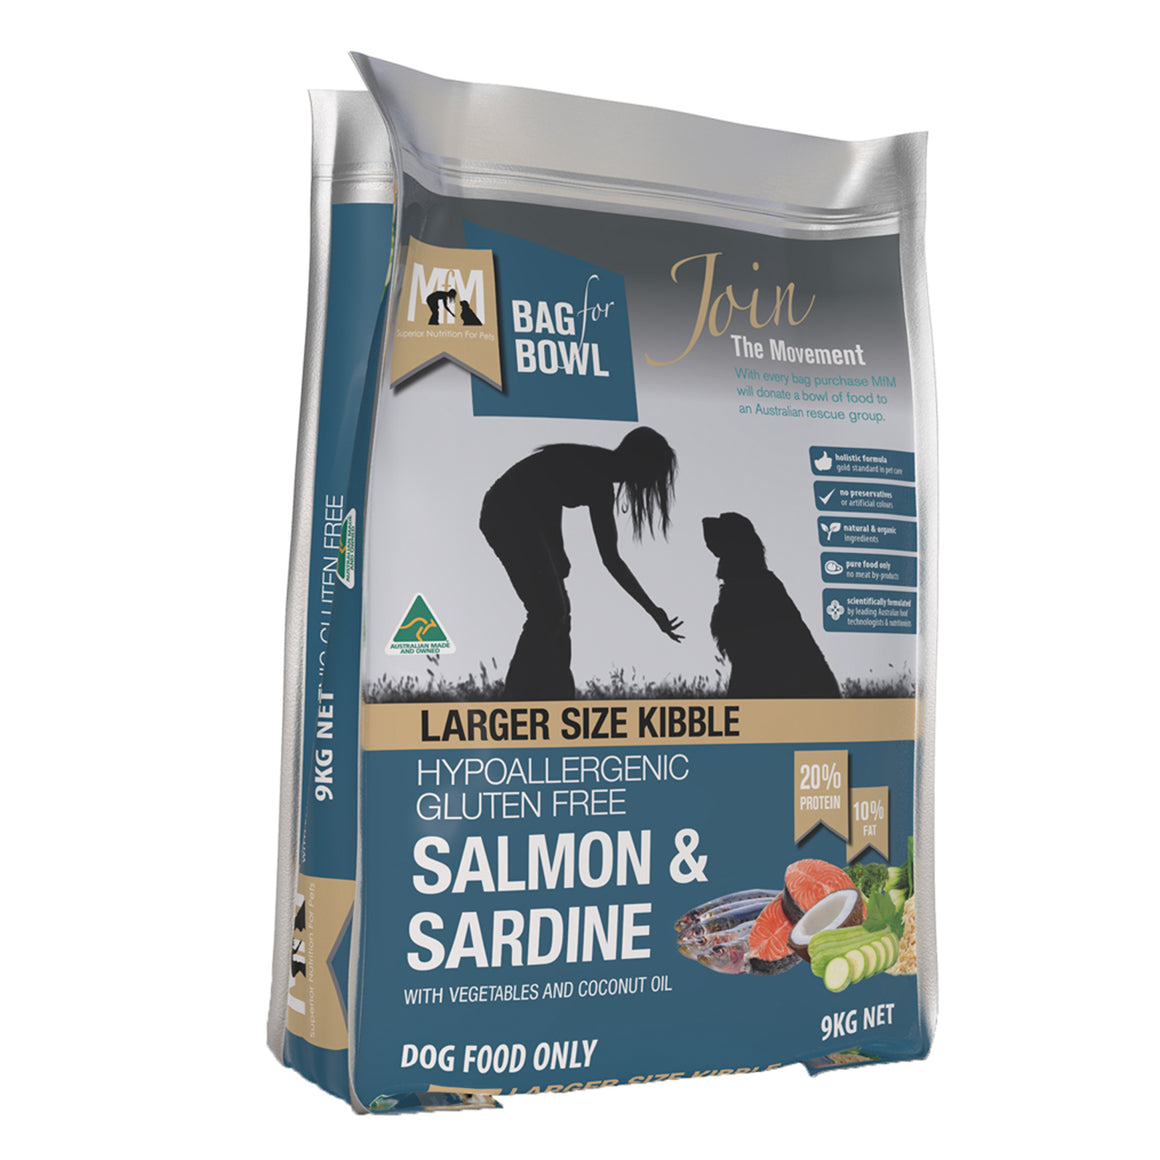 Meals for Mutts Gluten Free | Salmon & Sardine | Large Kibble | Pet Food Leaders 